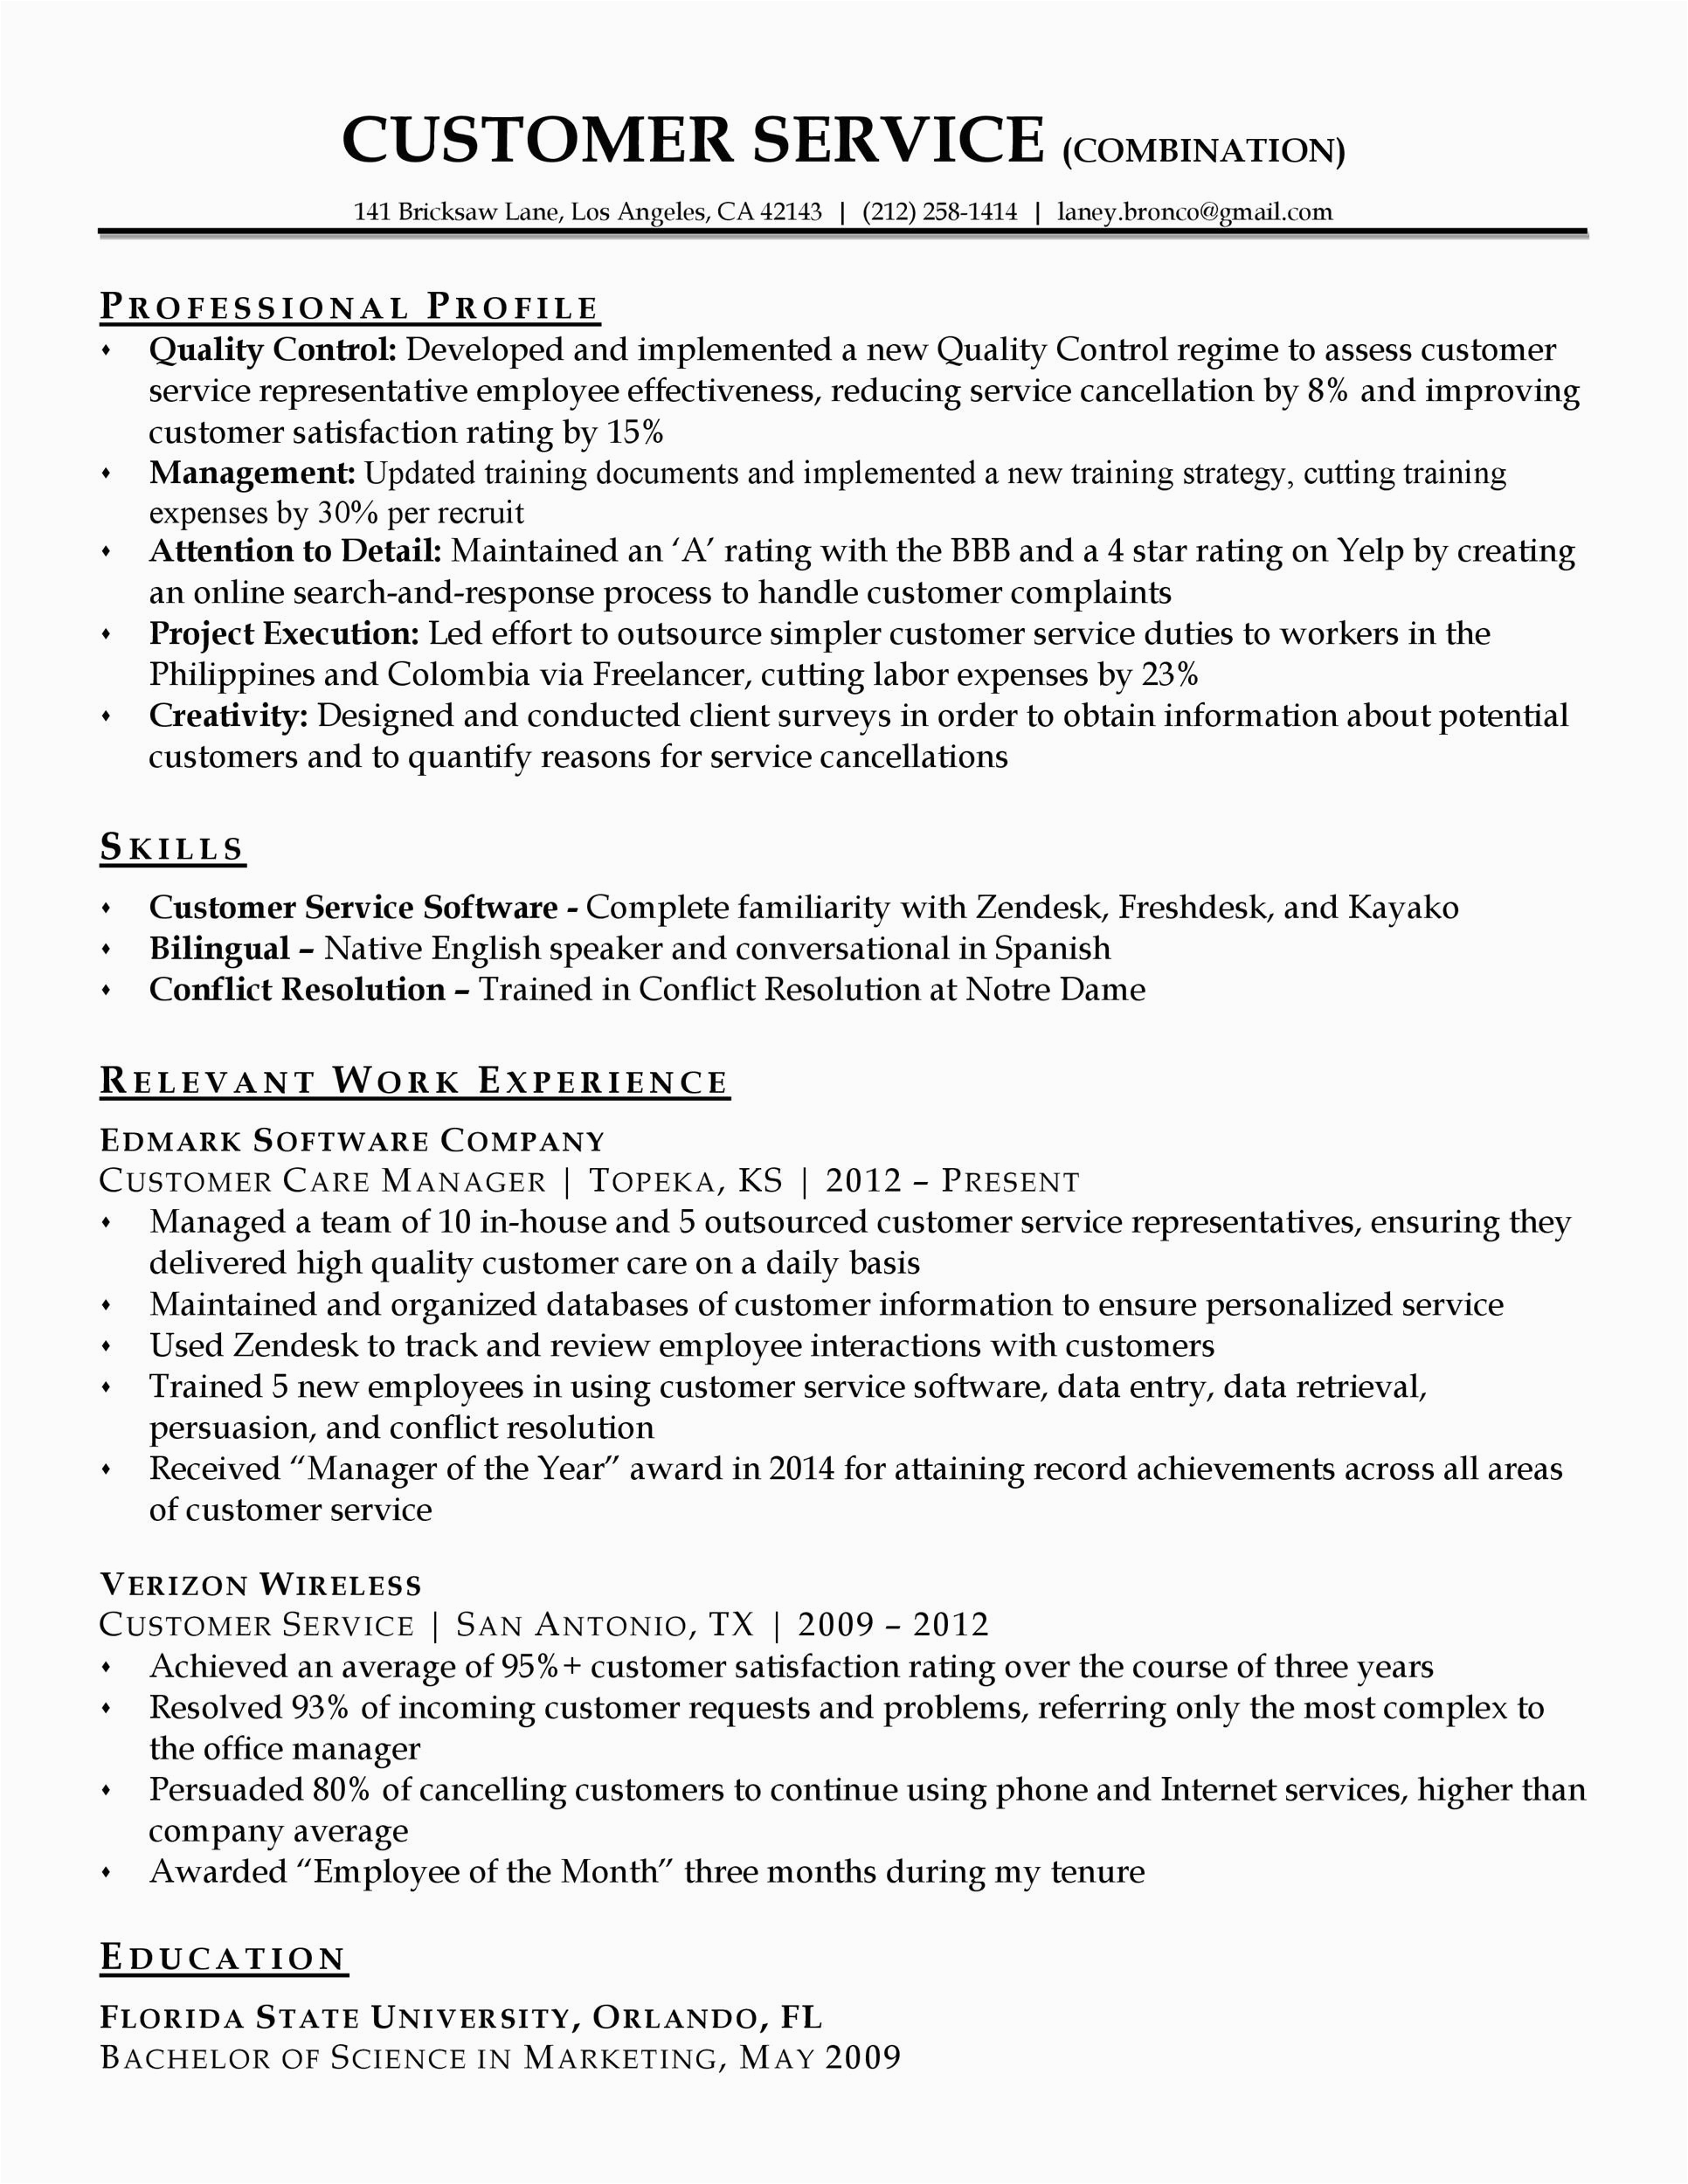 resume examples 2018 customer service